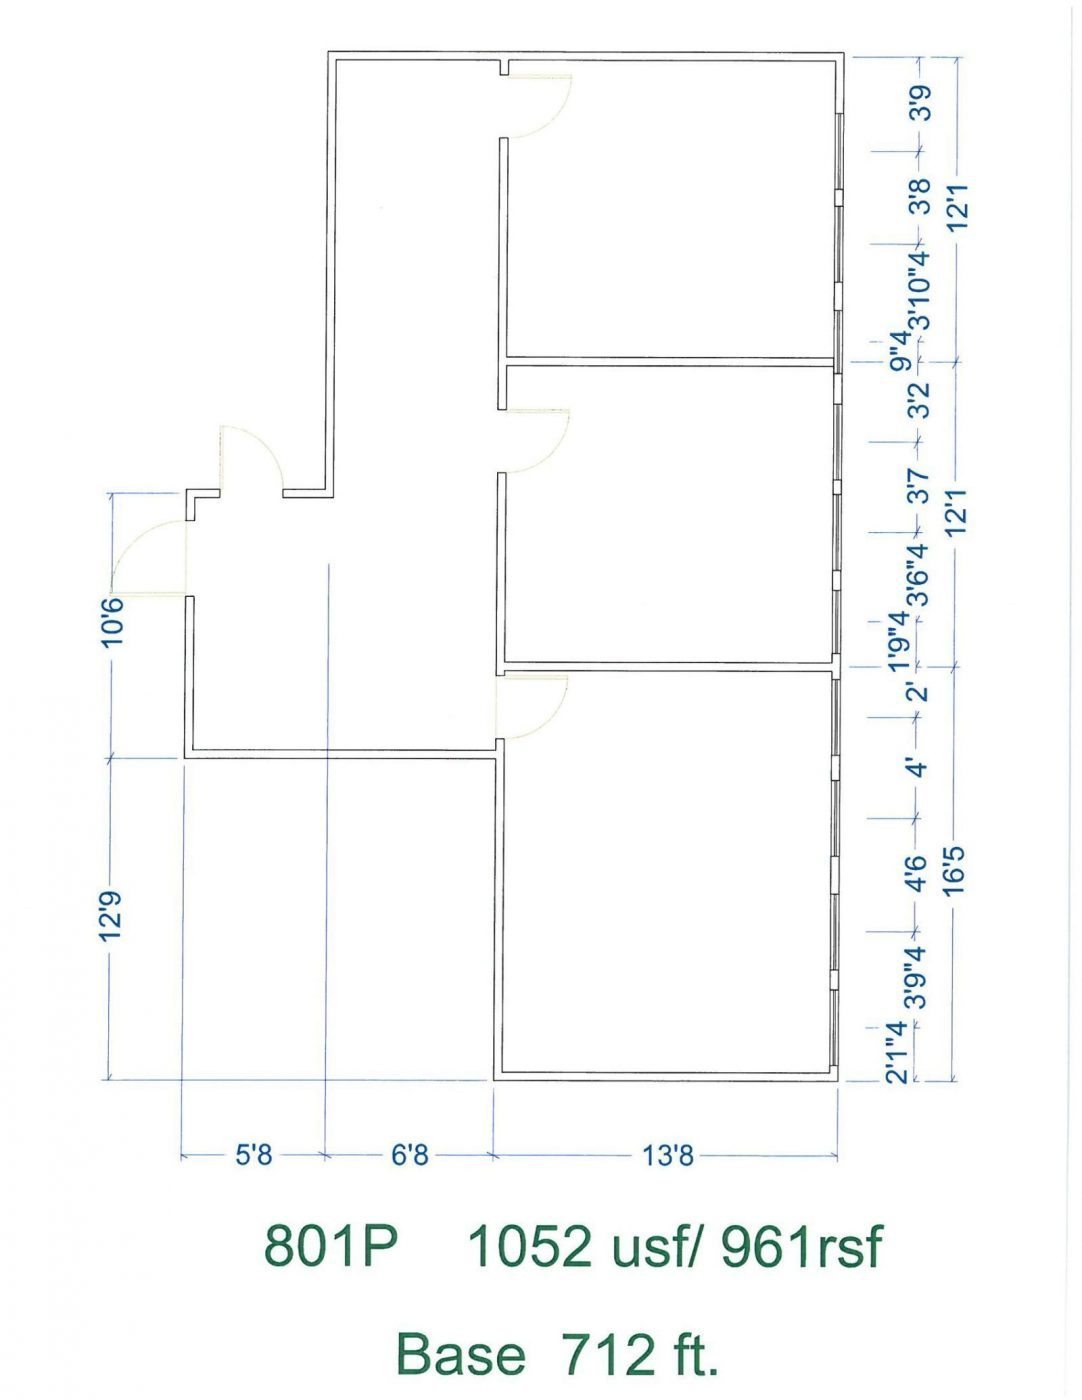 Floor Plan for unit 801P at 20755 Greenfield Rd - 8th Floor Southfield, MI 48075